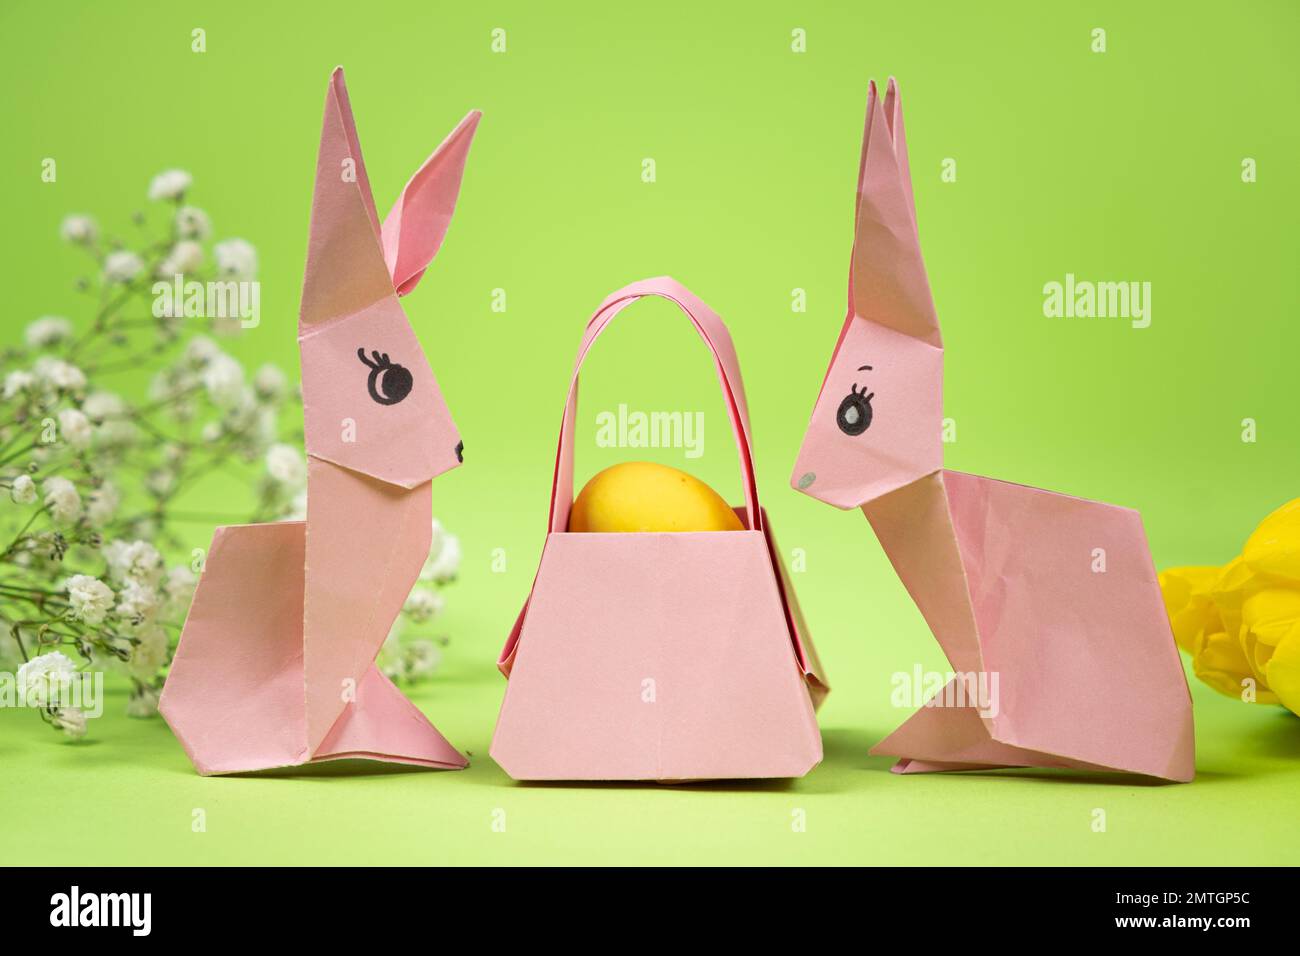 Easter origami - two paper bunnies and an egg, green background. Crafts for the holiday, do it yourself. Stock Photo